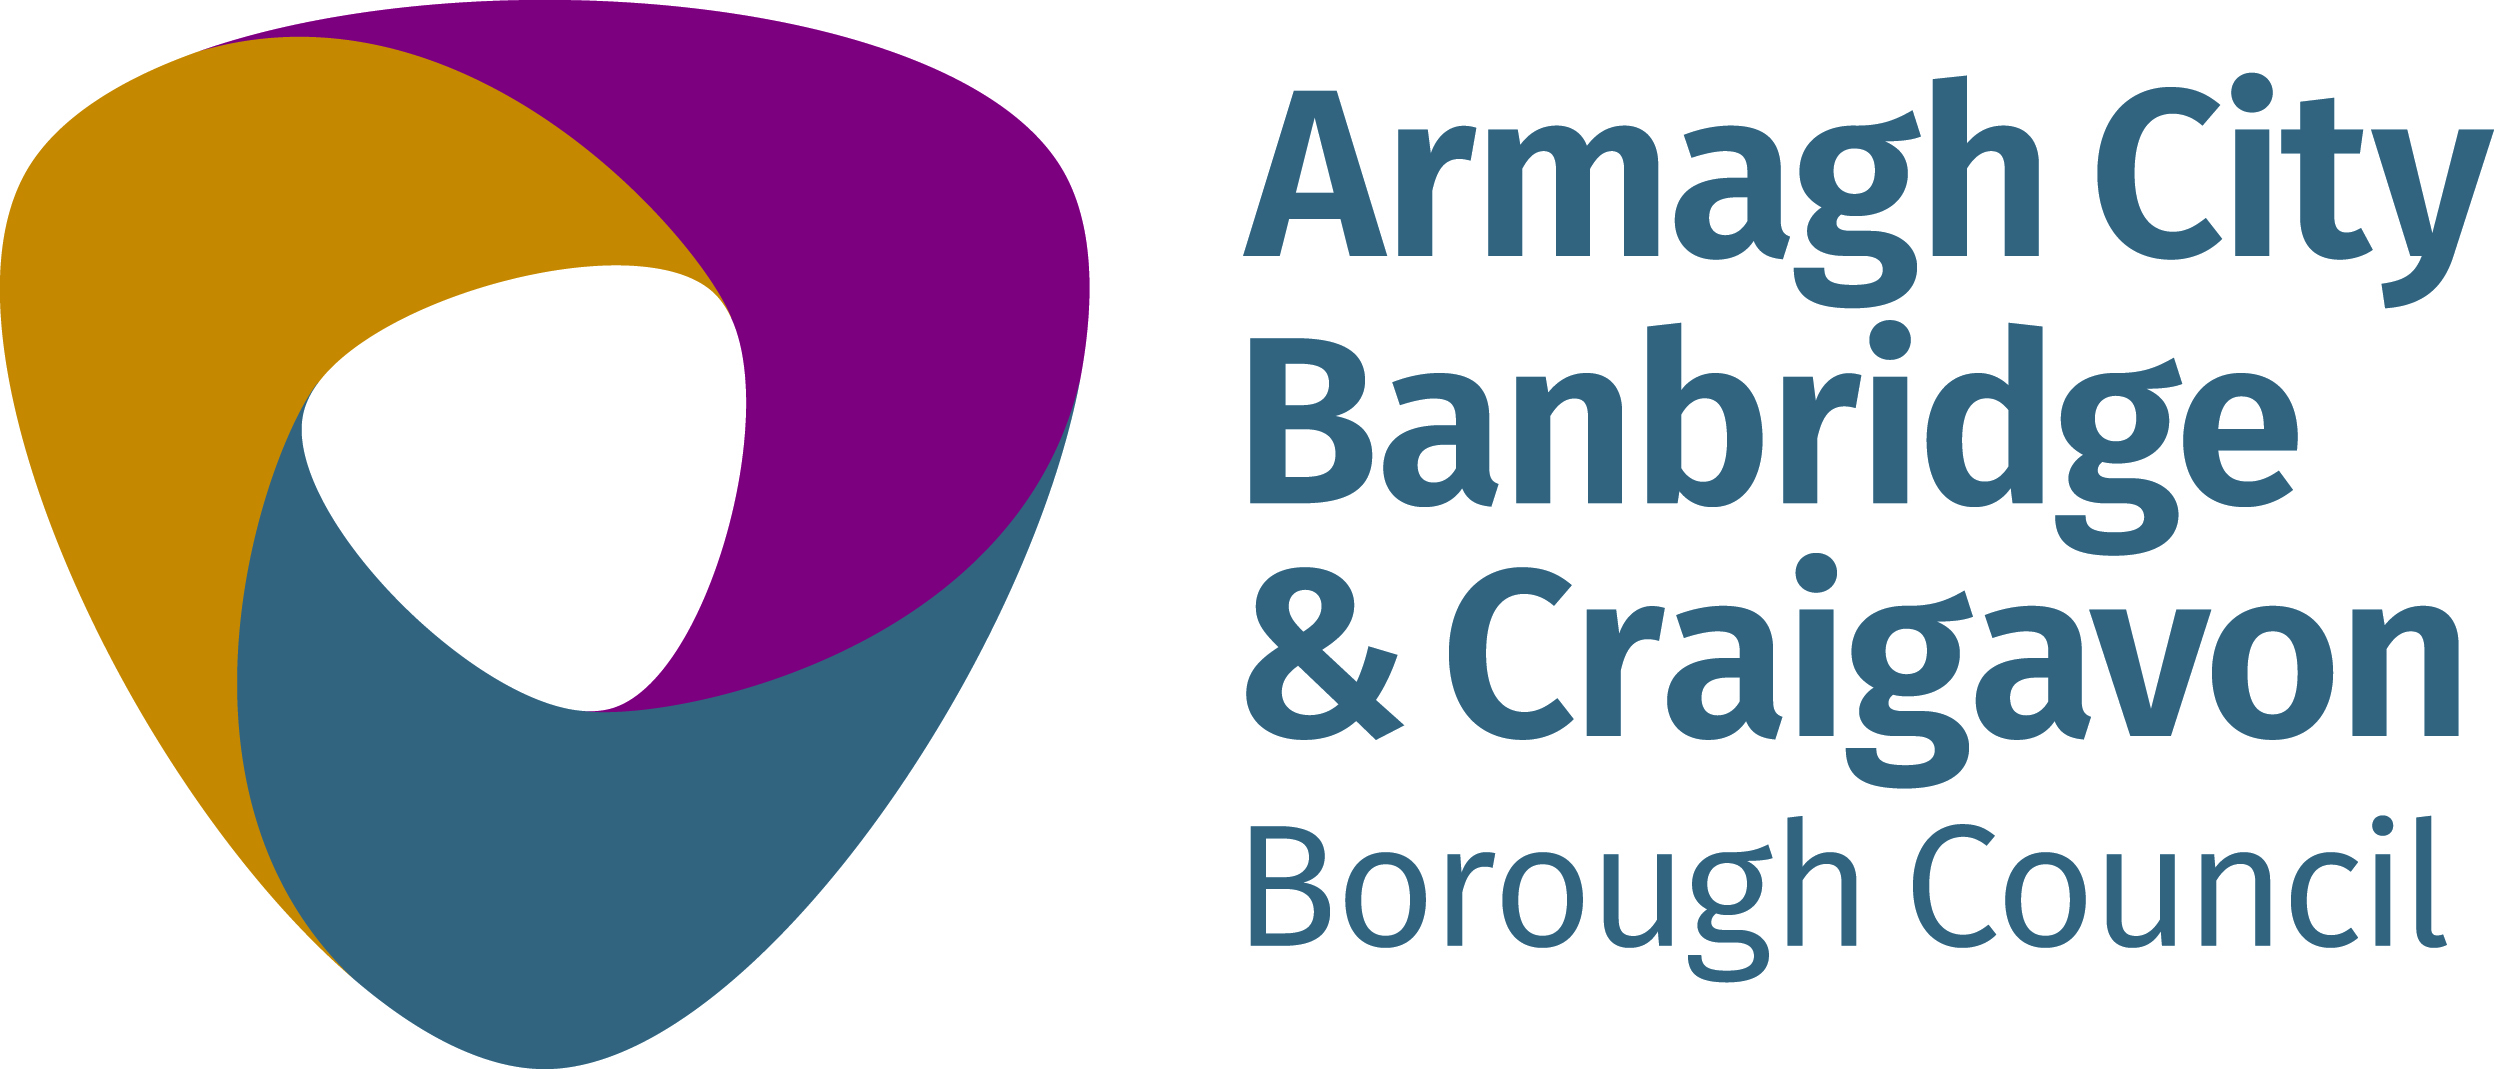 This programme is funded through Armagh City, Banbridge & Craigavon Borough Council